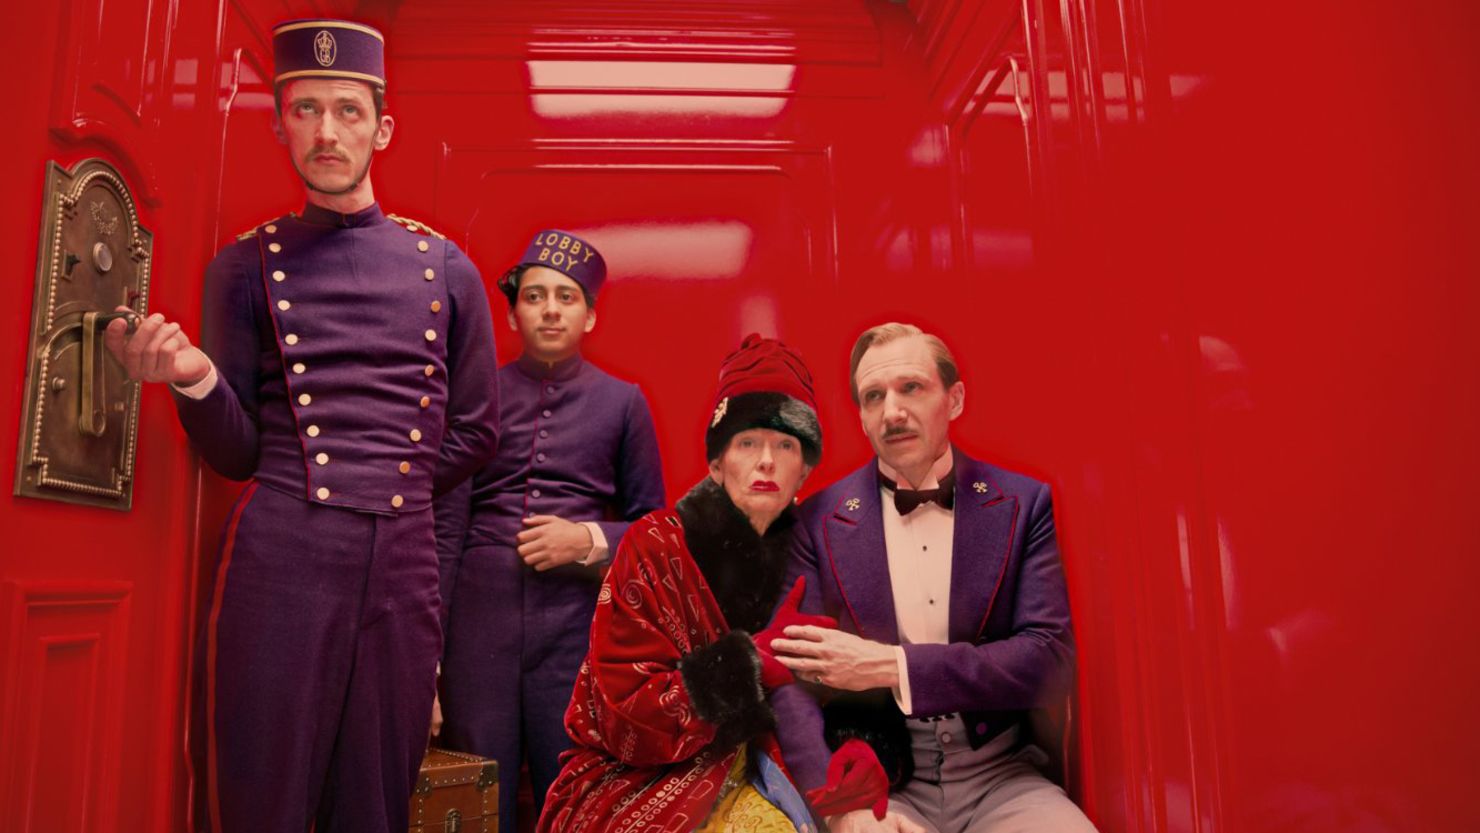 Wes Anderson is taking his vision of "The Grand Budapest" hotel to sea aboard the "Queen Mary 2." Space is precious.